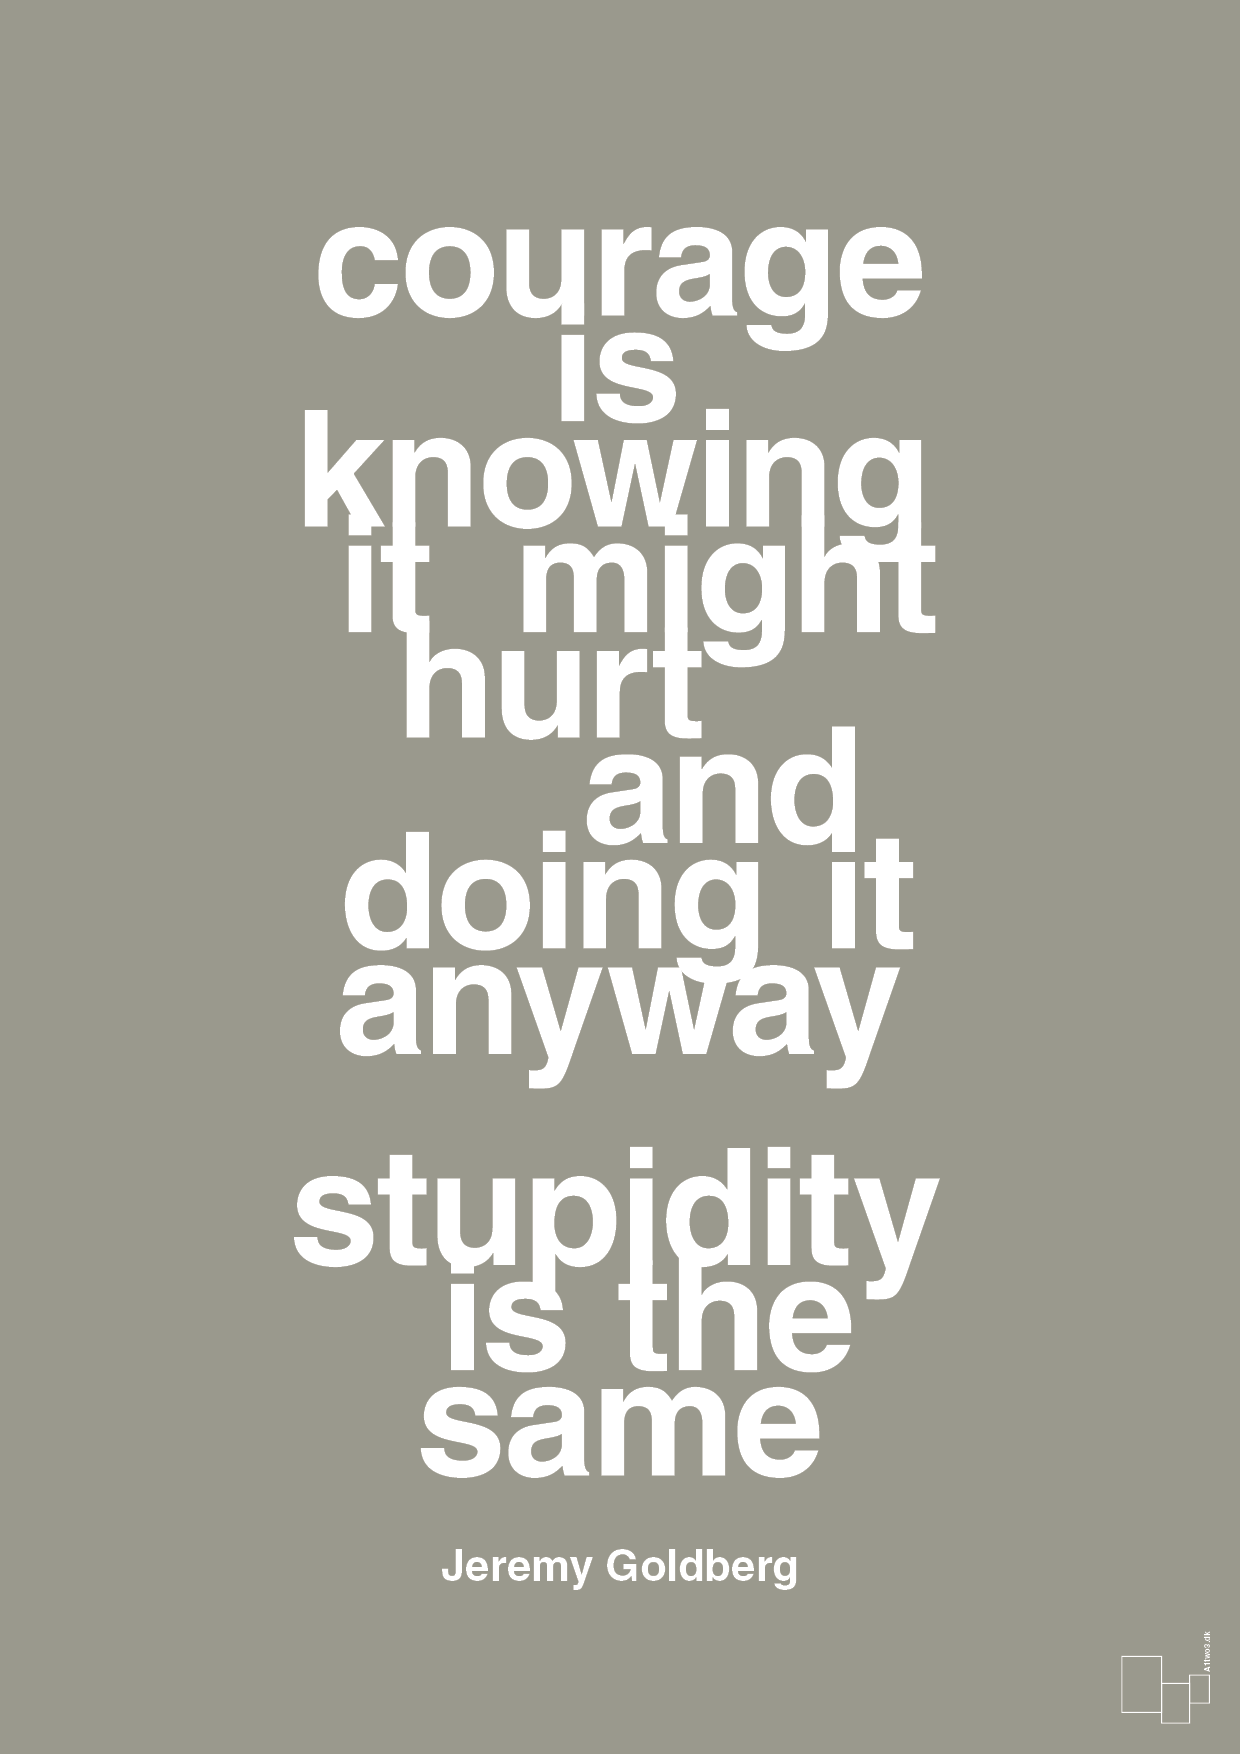 courage is knowing it might hurt and doing it anyway stupidity is the same - Plakat med Citater i Battleship Gray